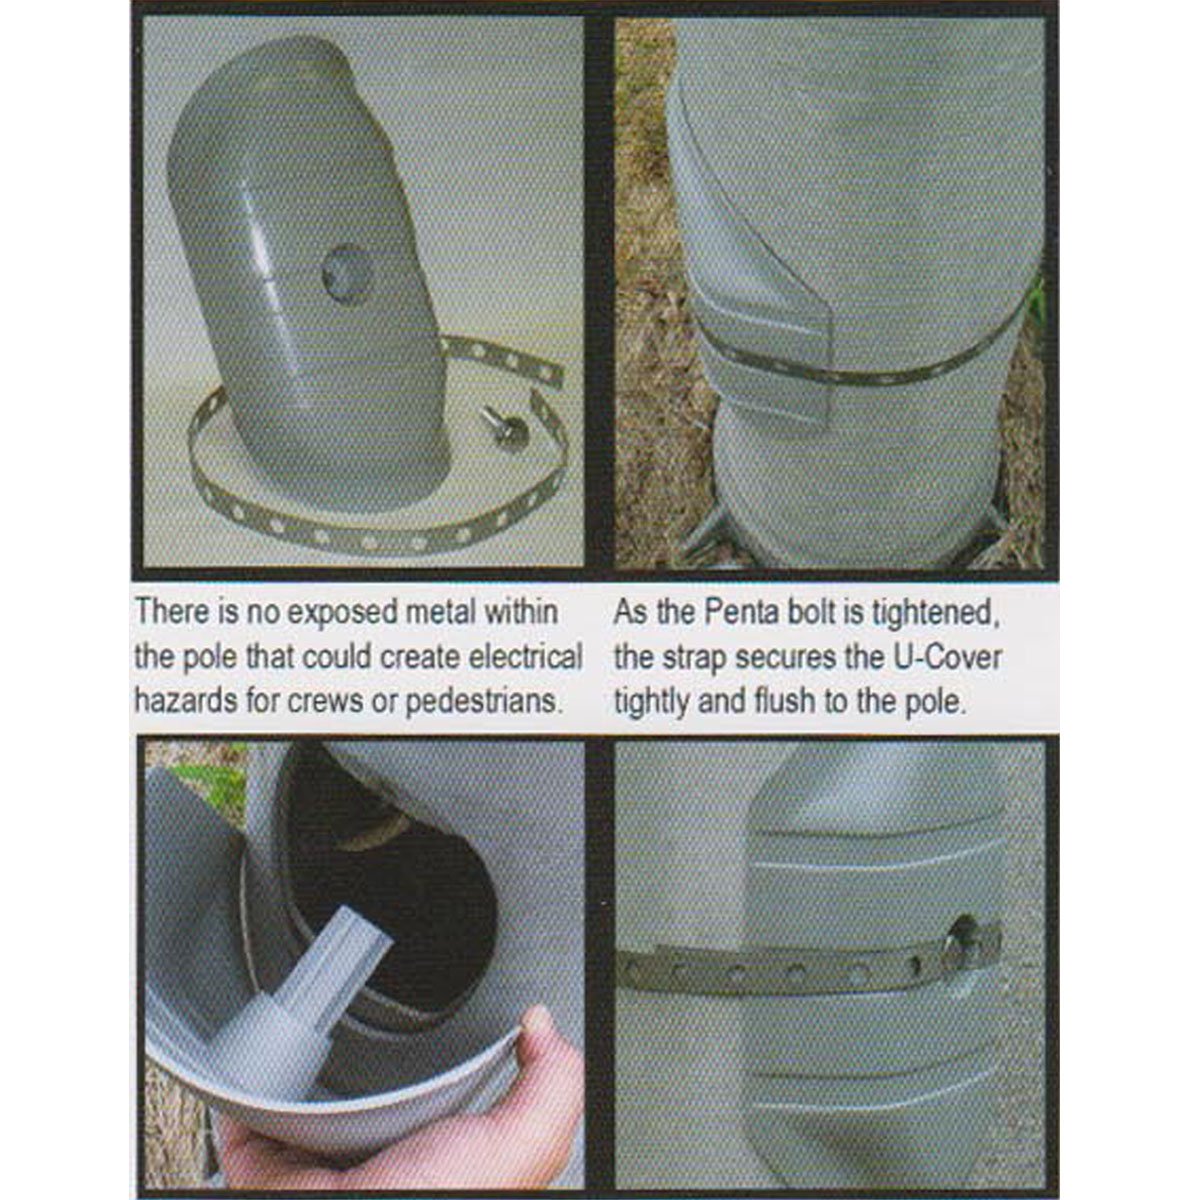 U-Cover Lamp Post Cover 1 - lamp post cover, hand hole cover, light pole access covers, street lighting systems